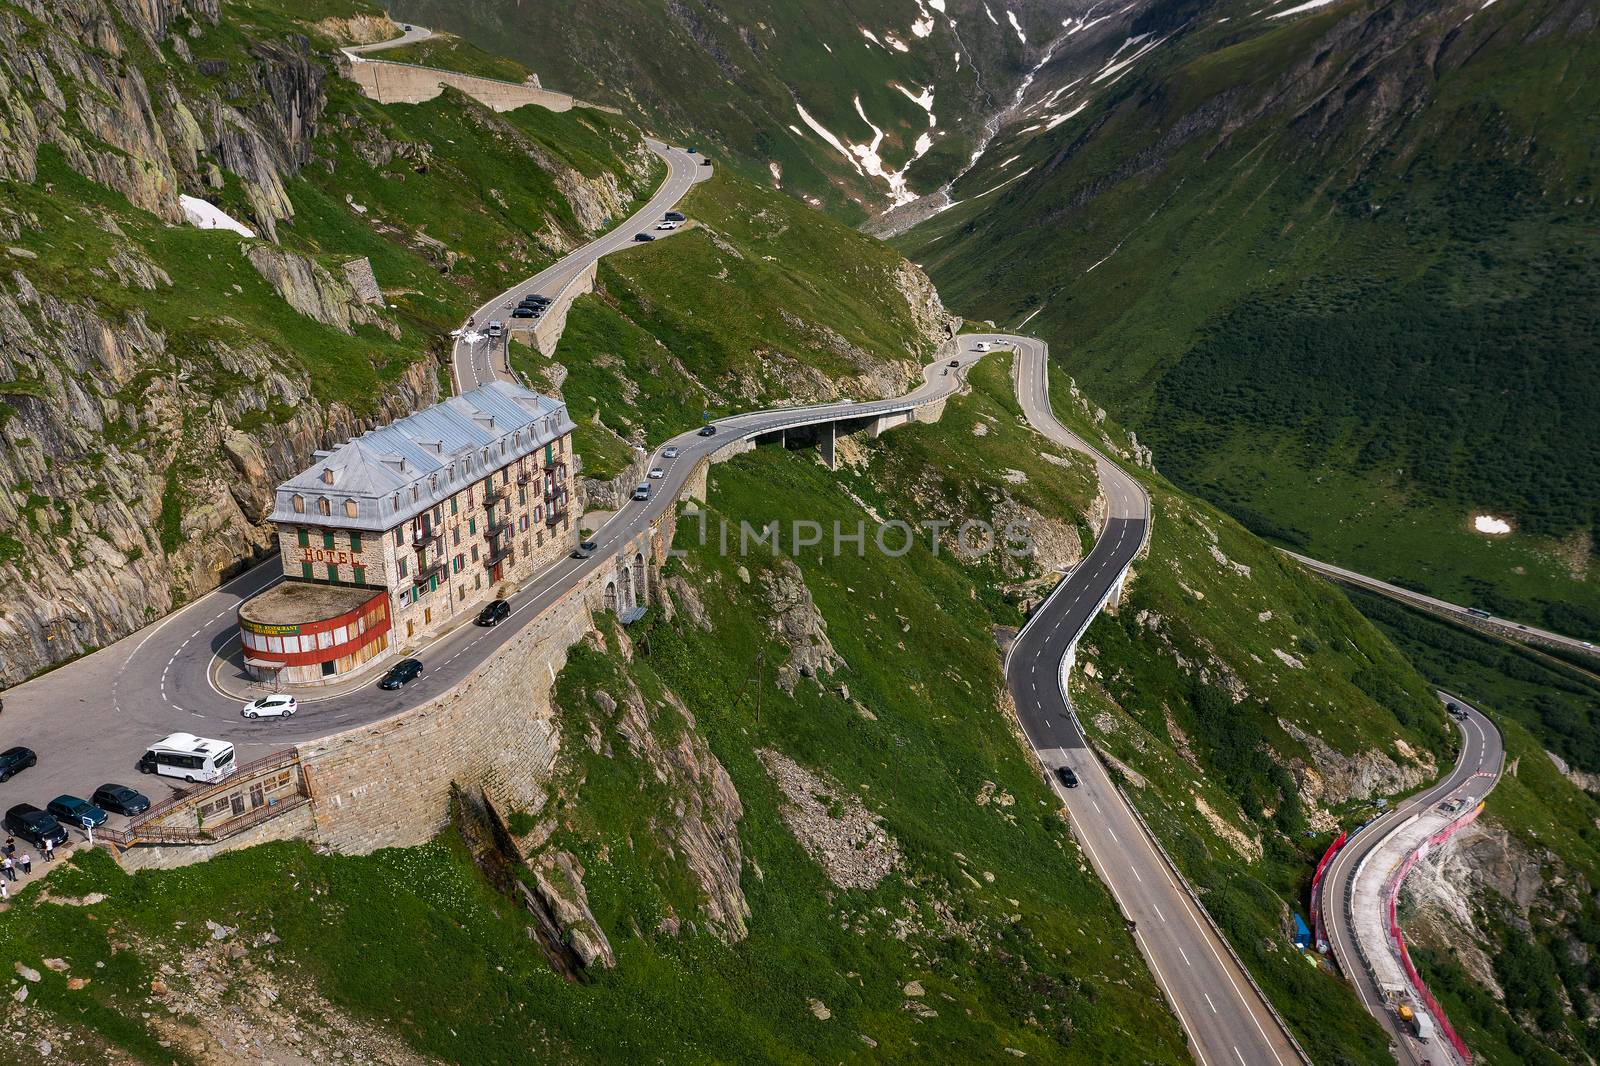 Aerial view of the closed mountain hotel Belvedere in Furka Pass, Switzerland by nickfox